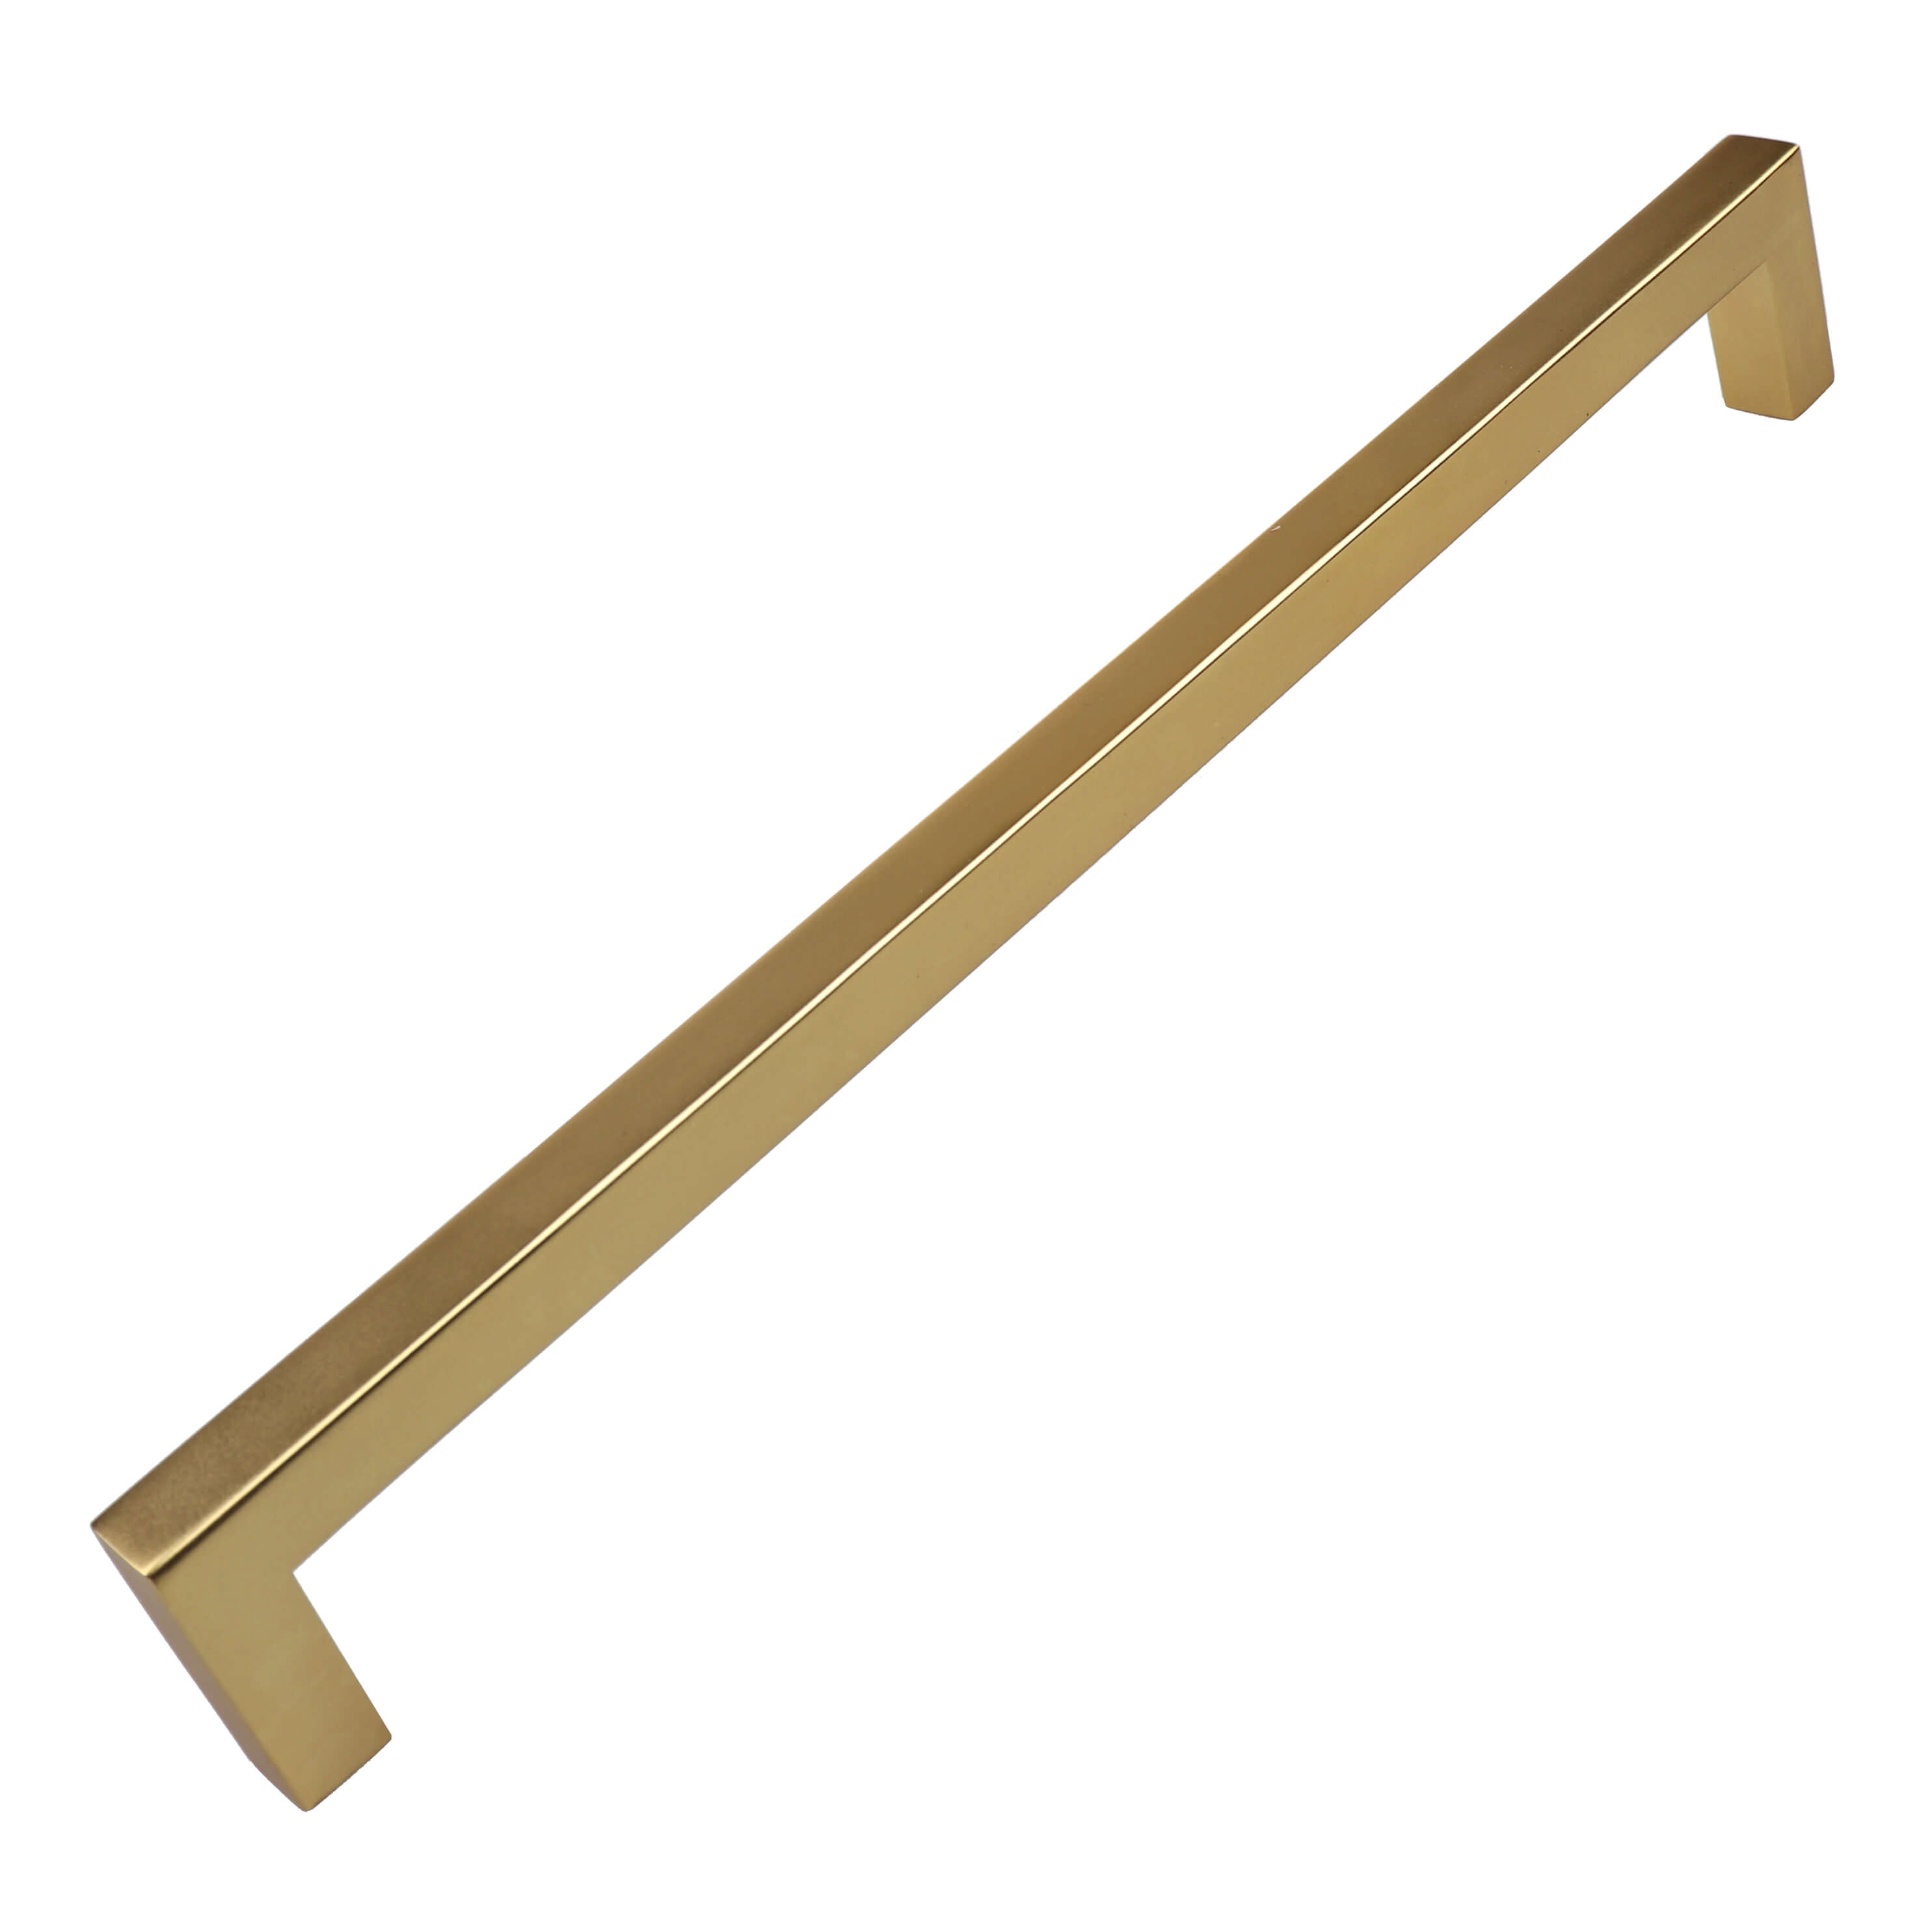 GlideRite 8-3/4 in. Center Solid Square Bar Cabinet Pulls, Brass Gold, Pack of 5 - image 1 of 3